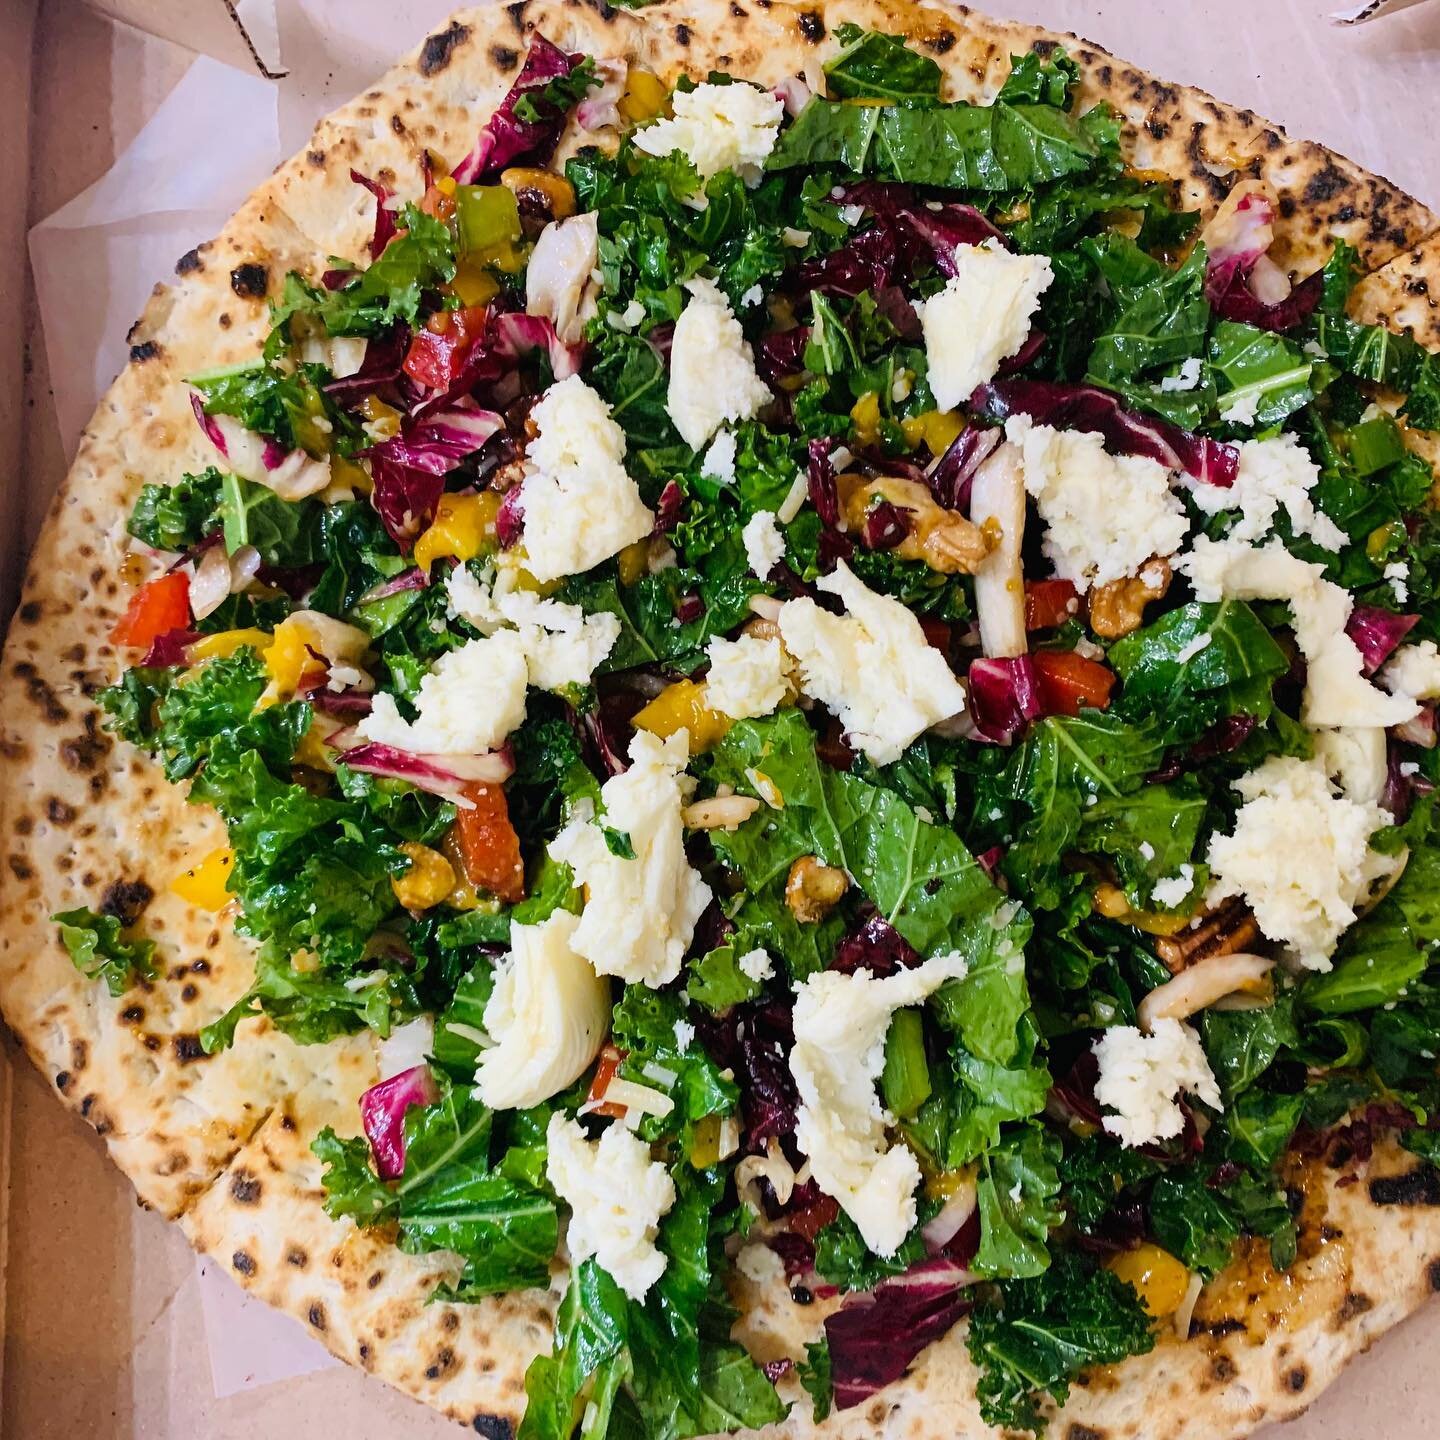 Kale salad Pizza! 
Yup, you read that right. It's delicious its healthy and... It's pizza. 

Open 7 Days 
#westhamptonbeachvillage #westhamptonbeach #westhampton #mainstreet #pizza #pizzalover #kalesalad